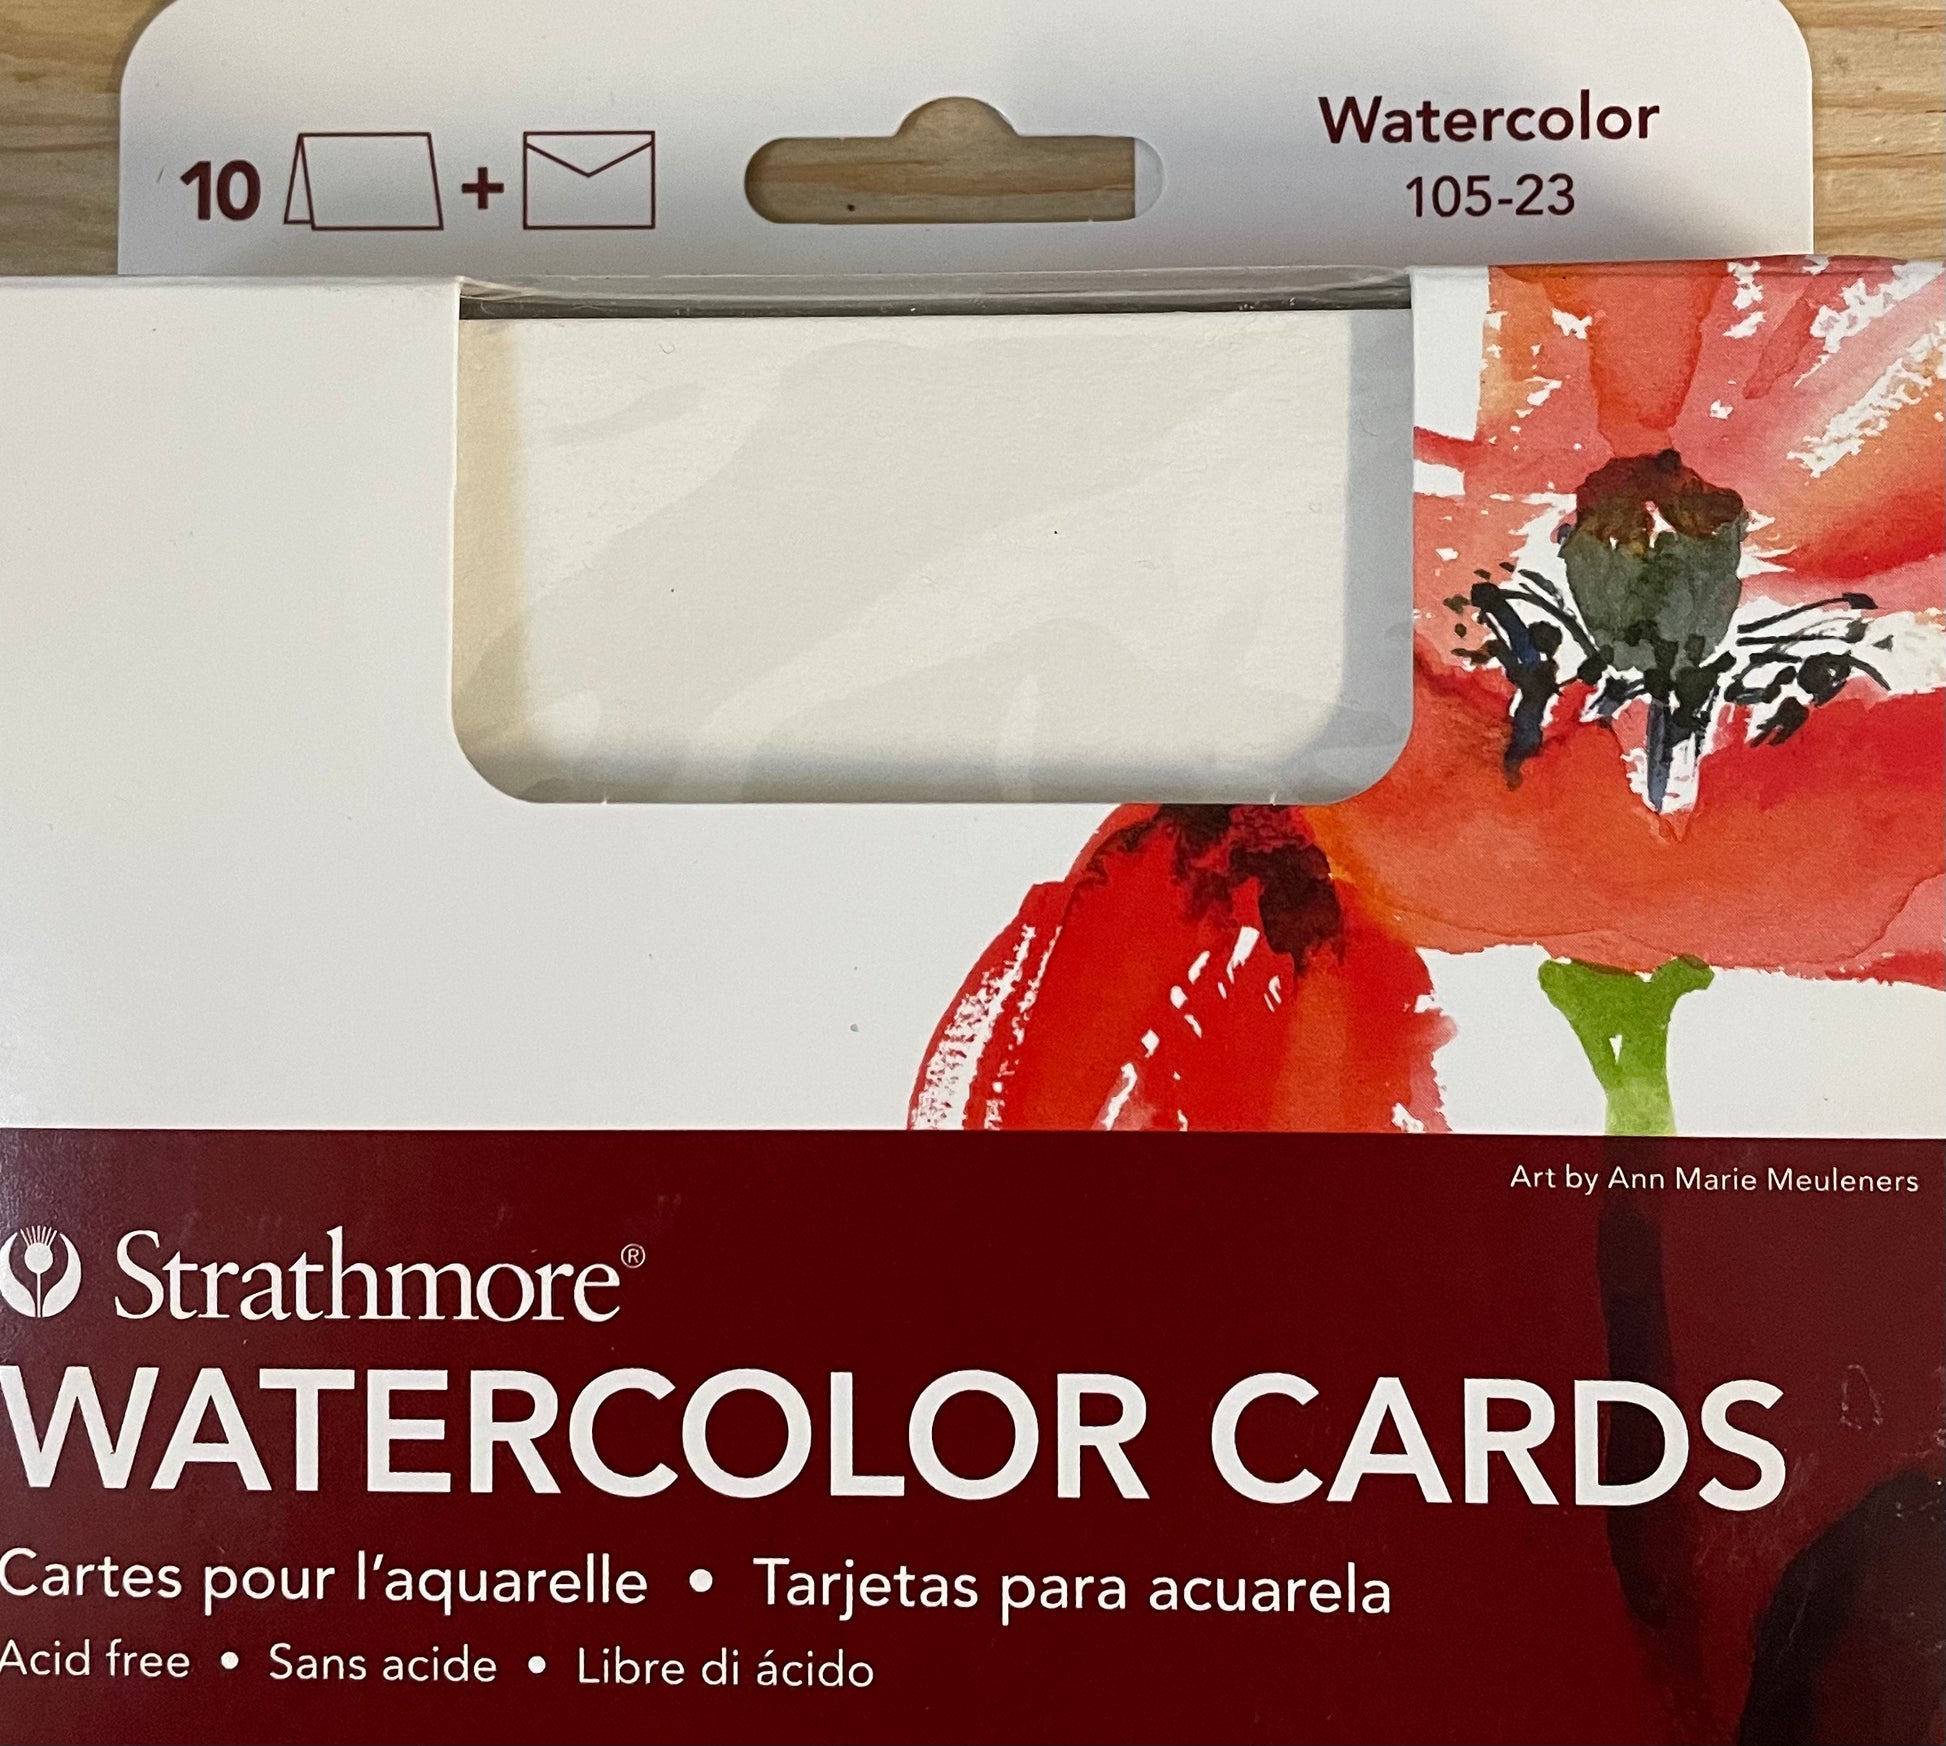 Strathmore Watercolor Cards #